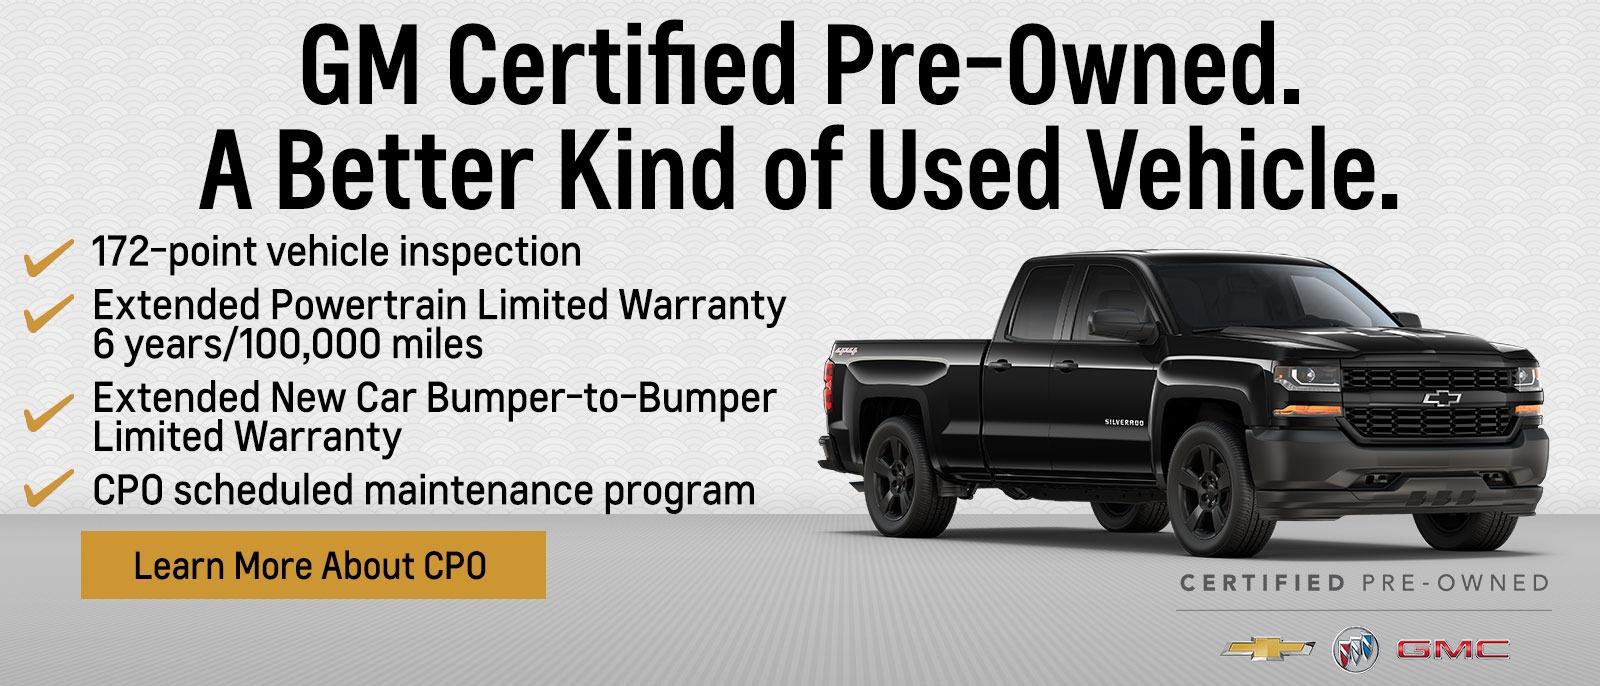 GM Certified Pre-Owned | A better kind of used vehicle